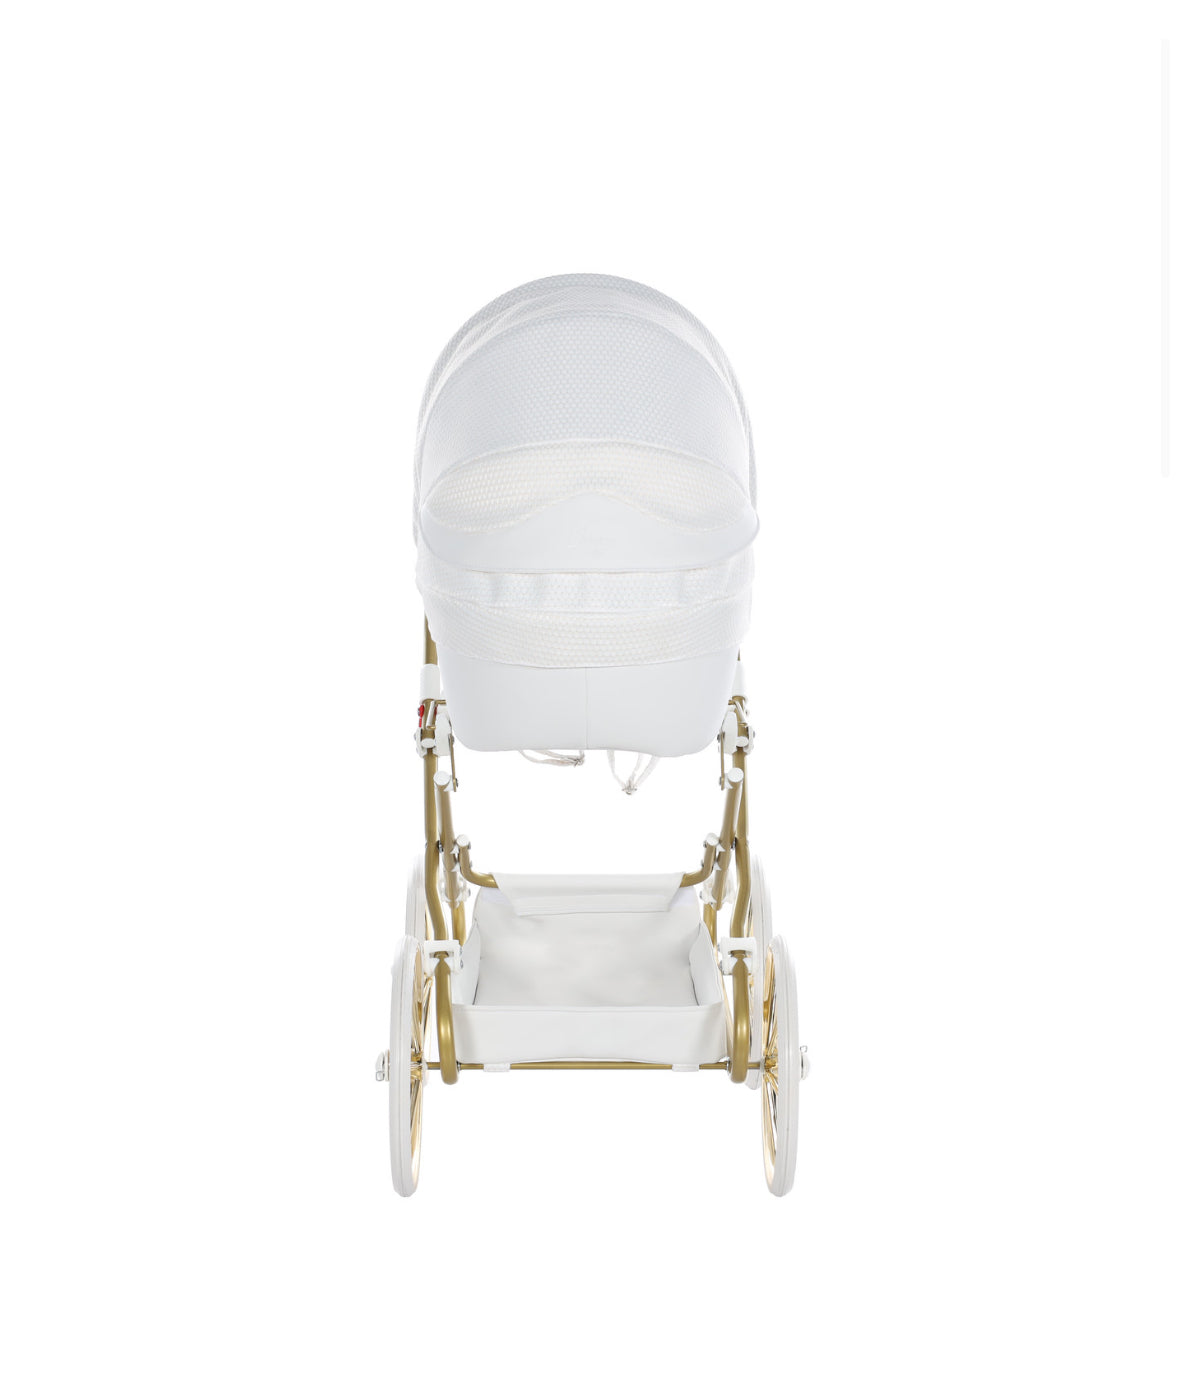 WHITE & GOLD DOLCE DOLL'S PRAM (1-2 days delivery)